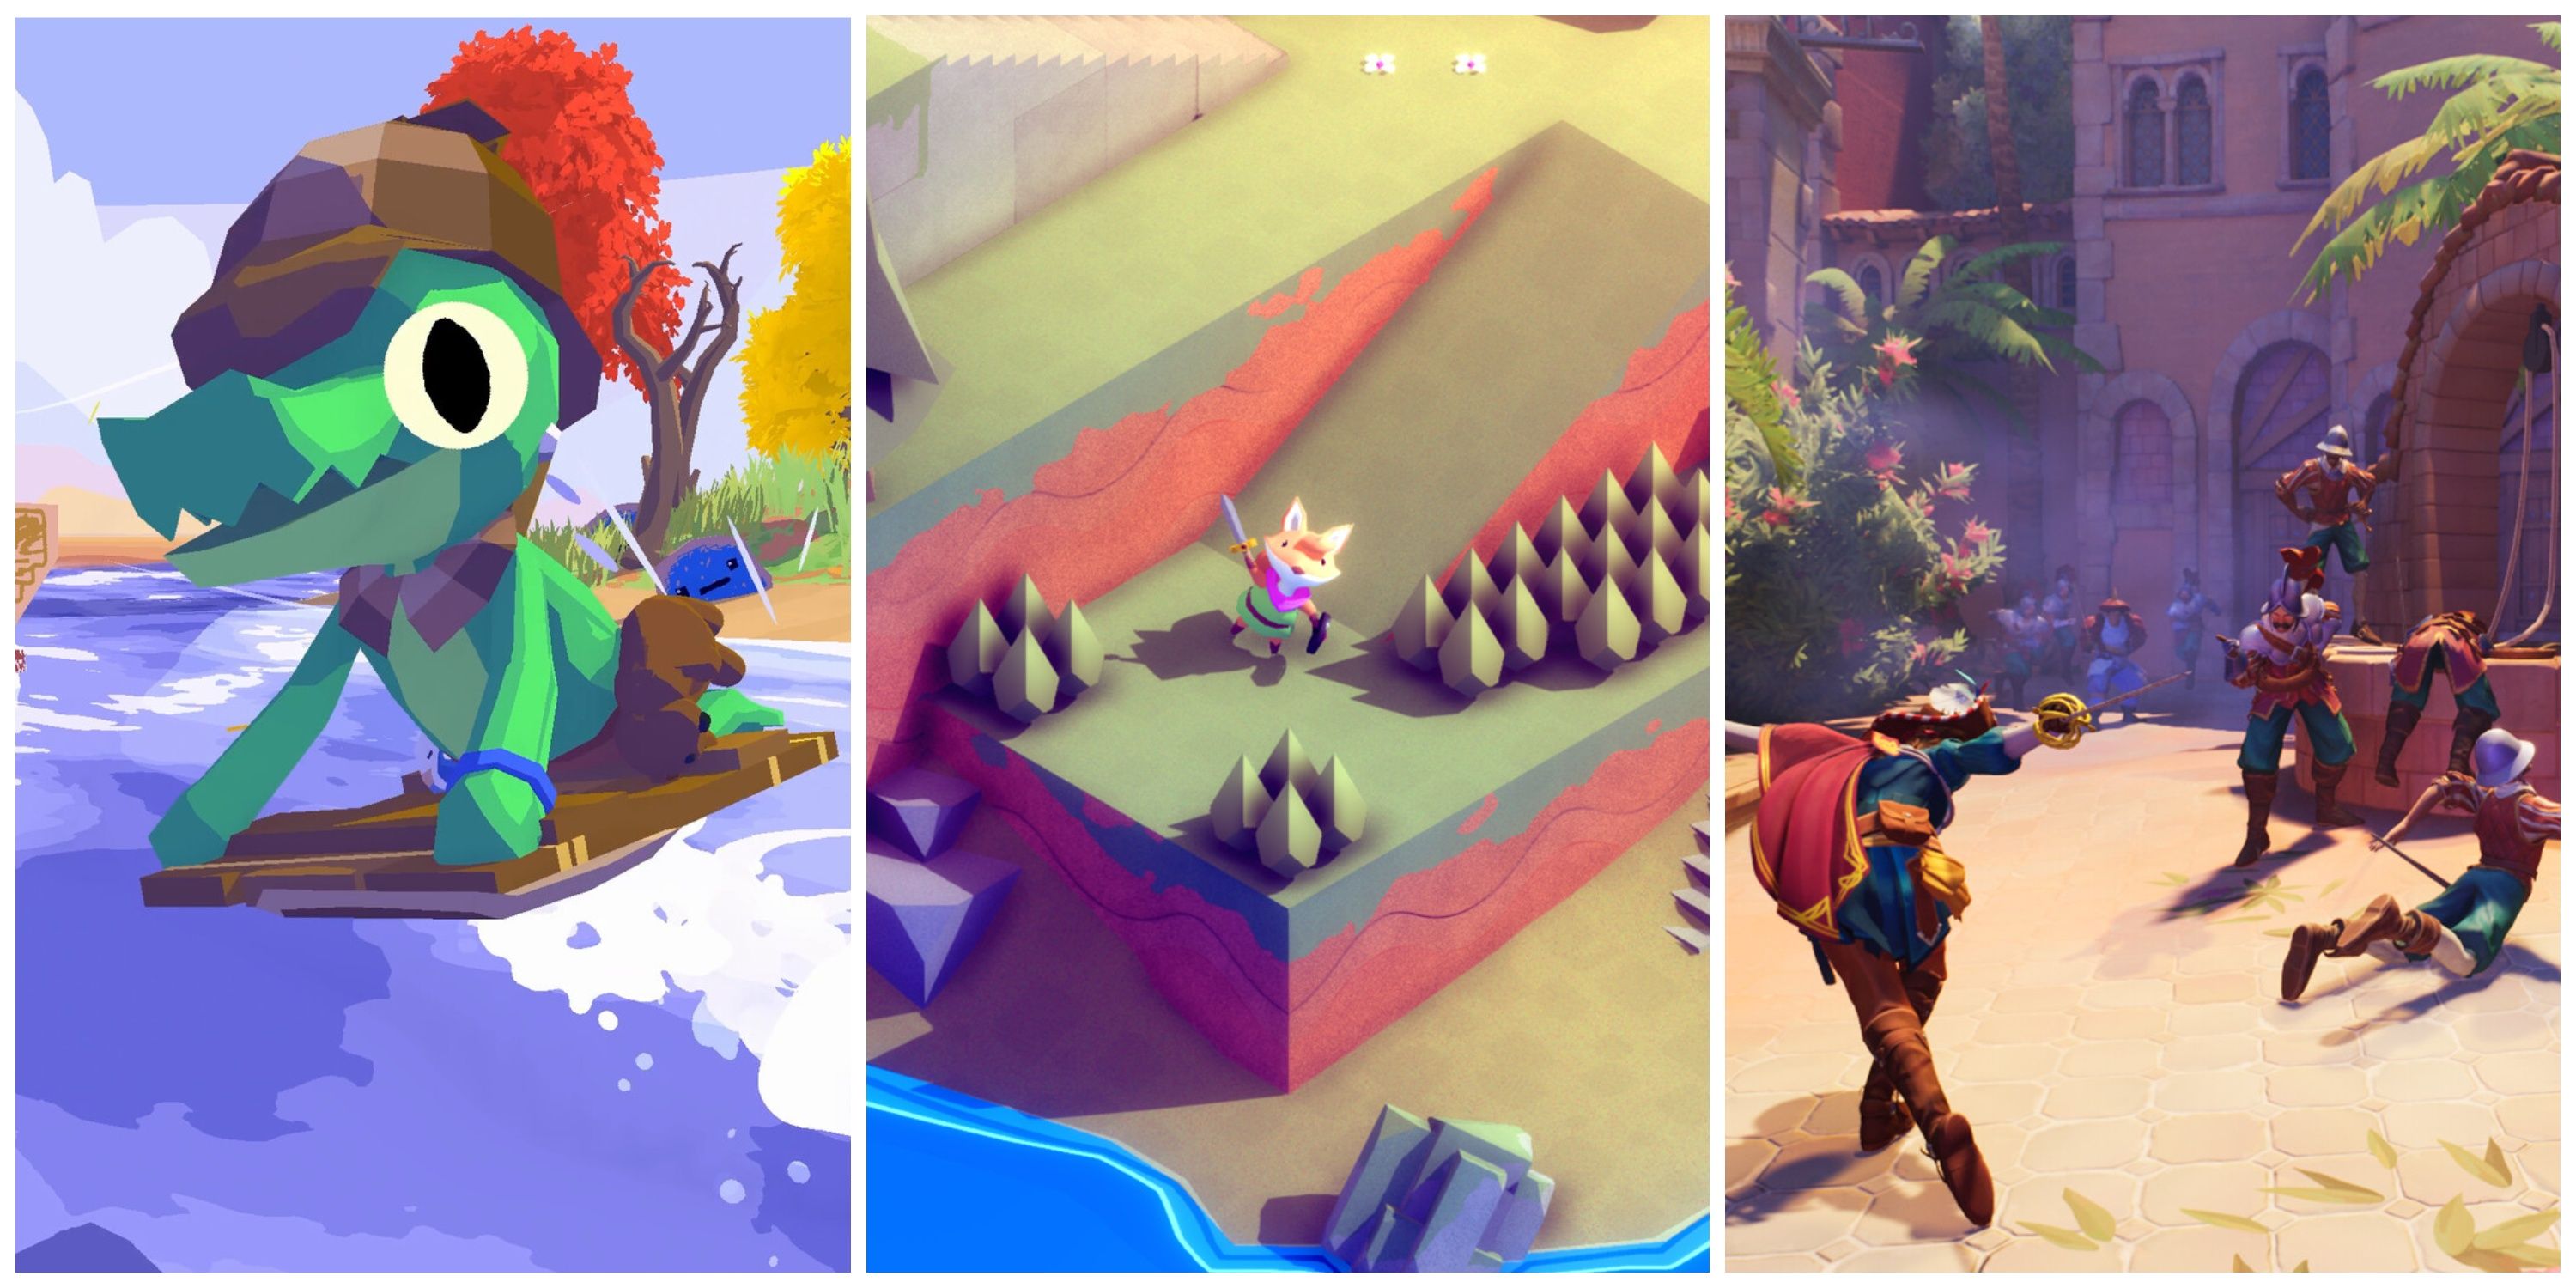 Bright and Colorful Indie Games (Featured Image) - Lil Gator Game + TUNIC + En Garde!